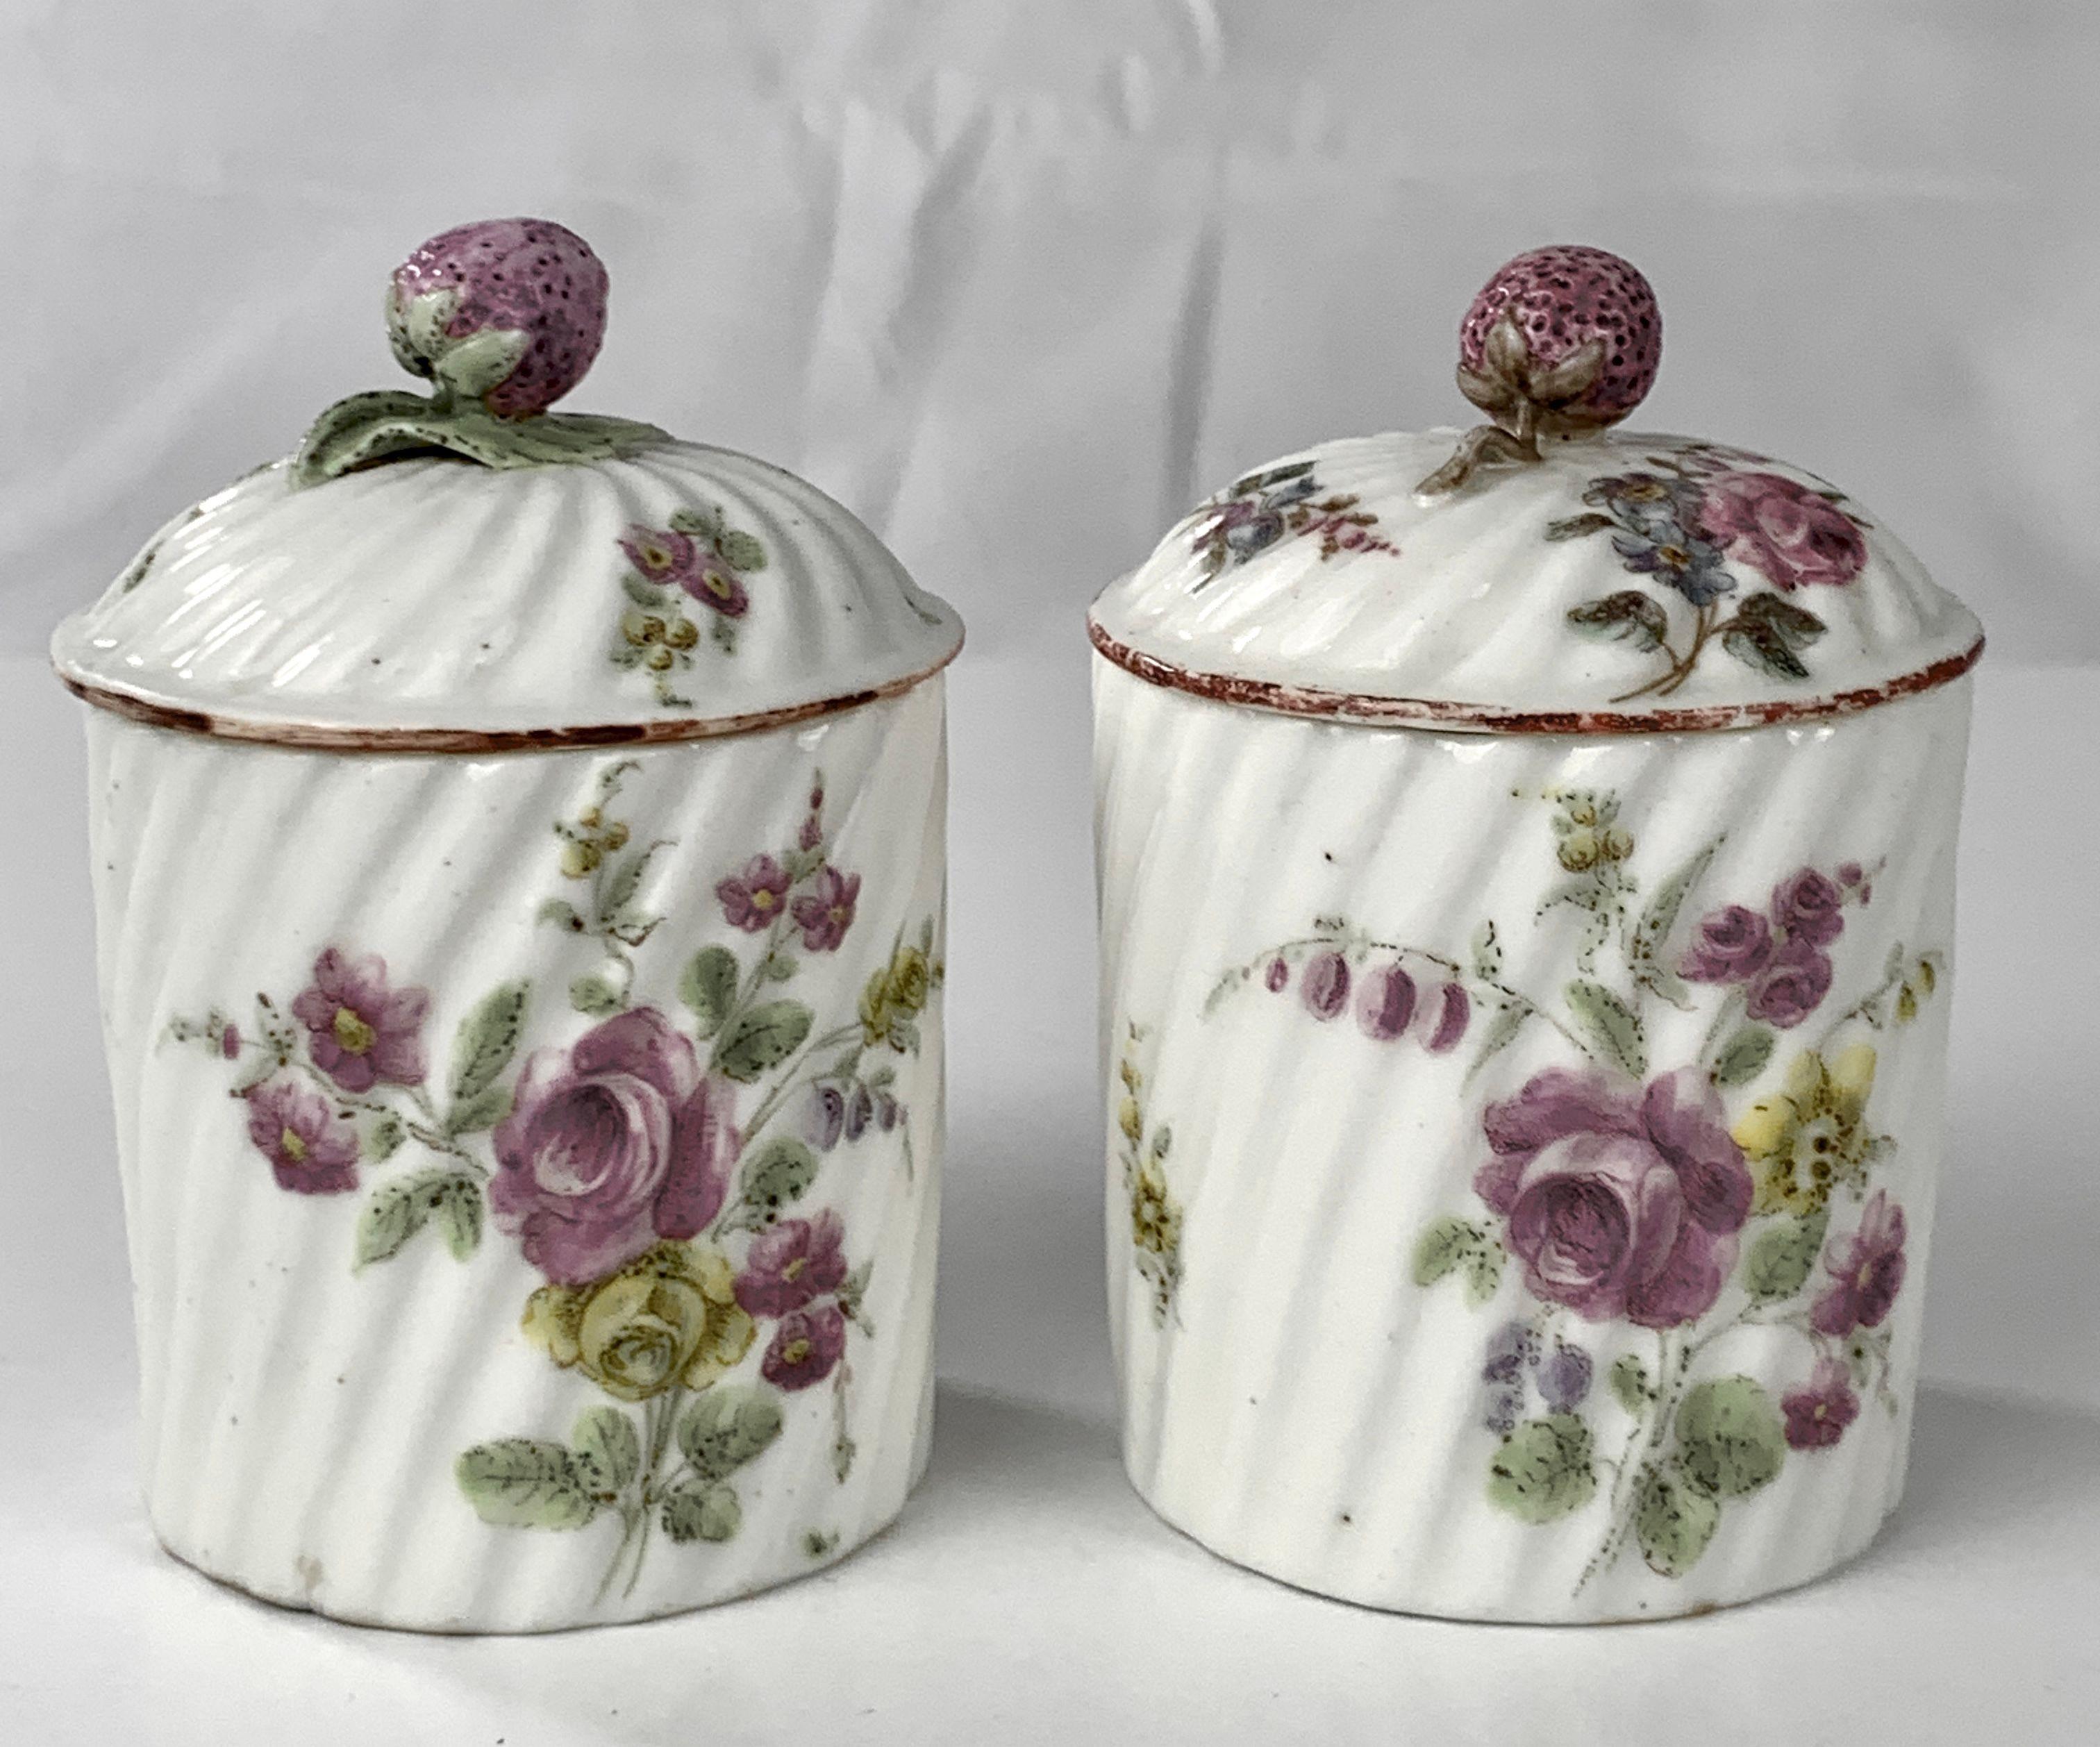 Provenance: A New England Estate
Hand-painted in the 18th century circa 1765 these beautiful Mennecy Porcelain soft-paste pomade pots are rare. Pots like this held rich creams and lotions for the face. They would have been placed on the vanity of